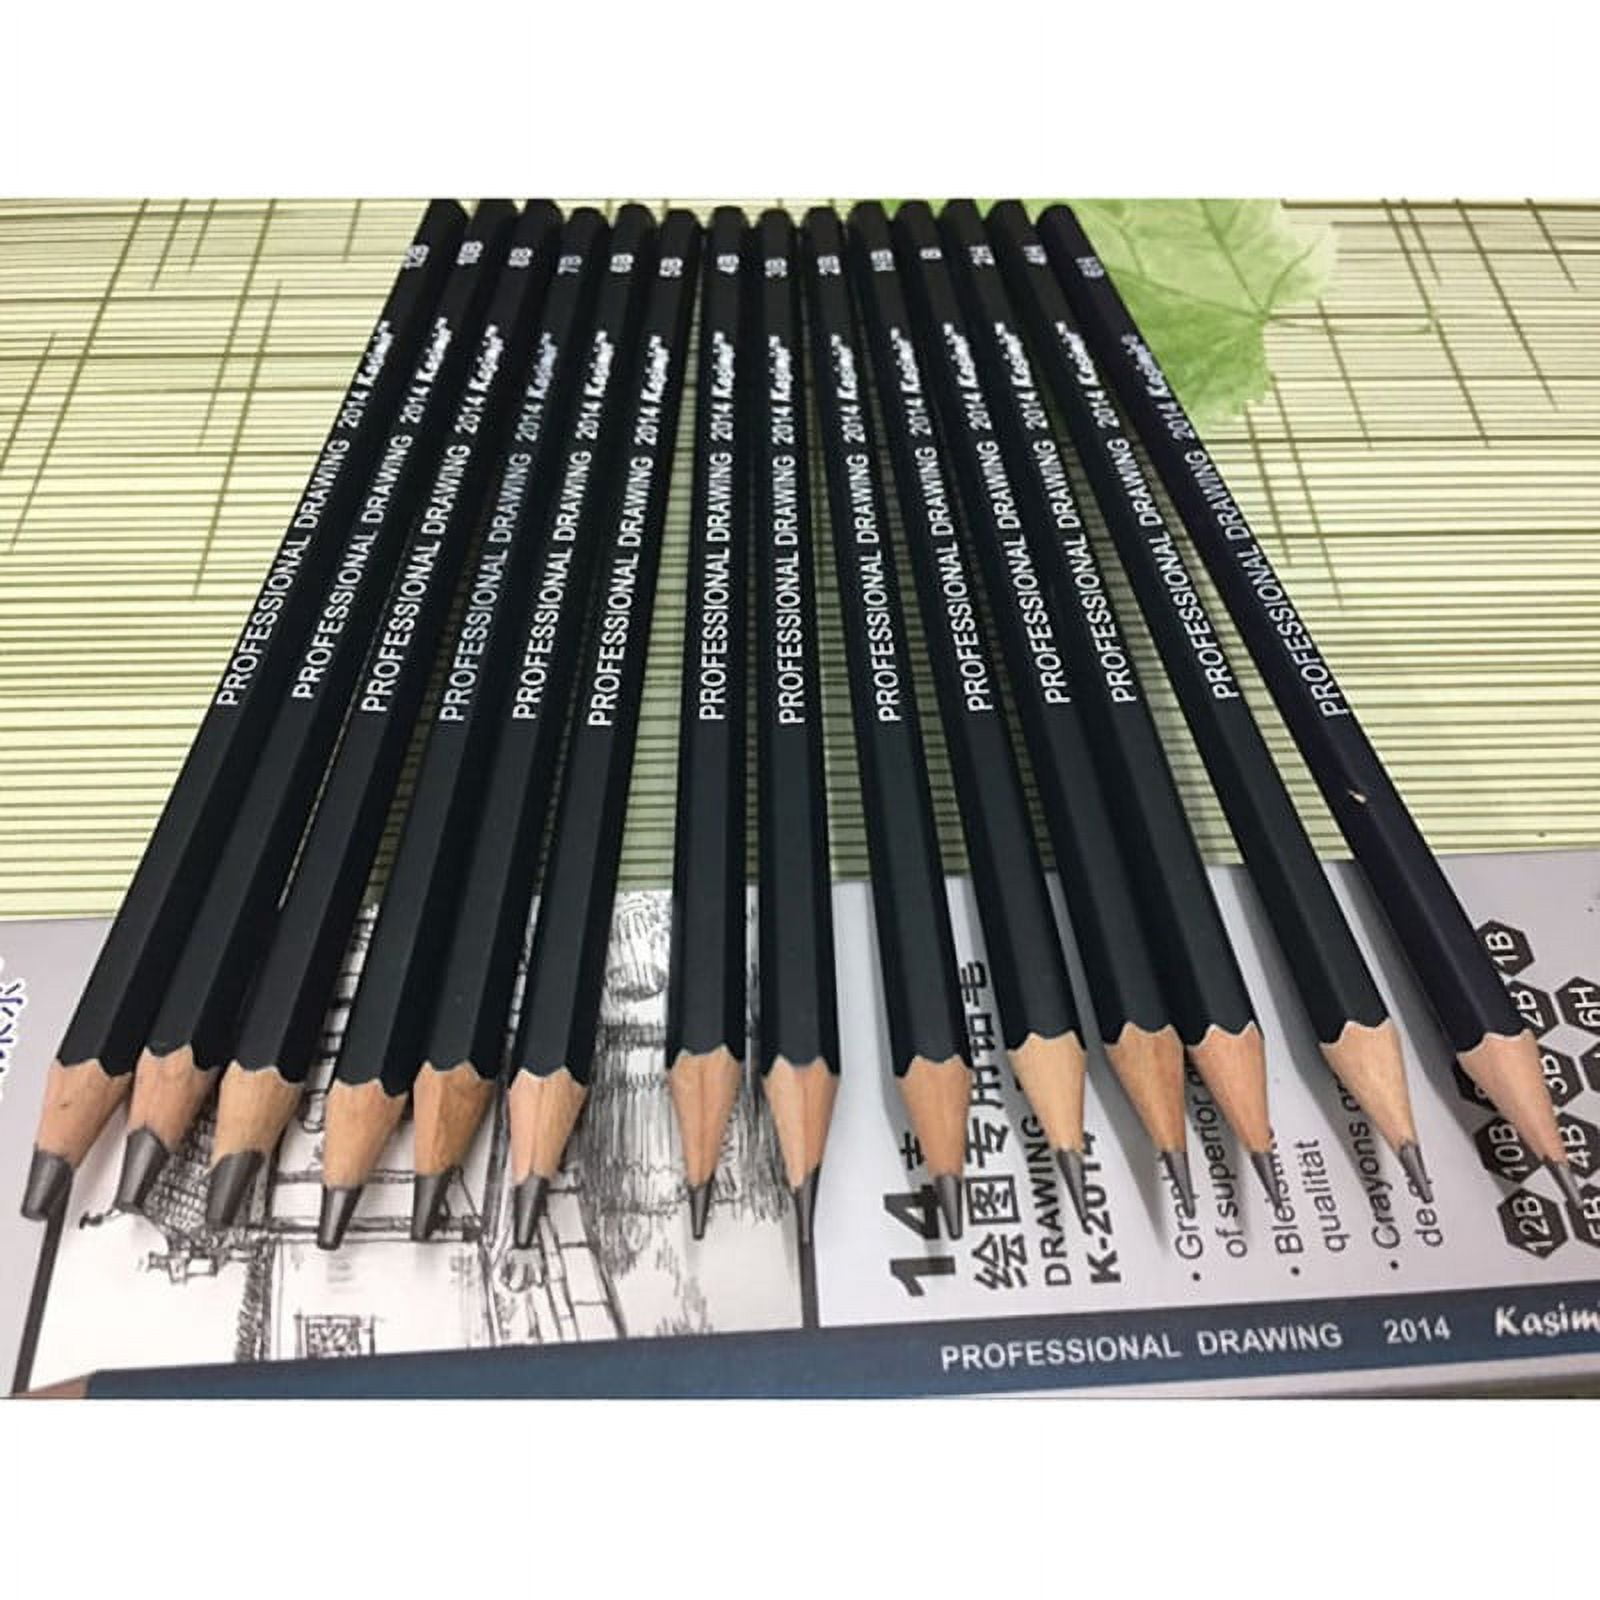 Graphite Drawing Pencils and Sketch Set (14-Piece Kit), 1B - 6H, Ideal for  Drawing Art, Sketching, Shading, Artist Pencils for Beginners & Pro Artists  